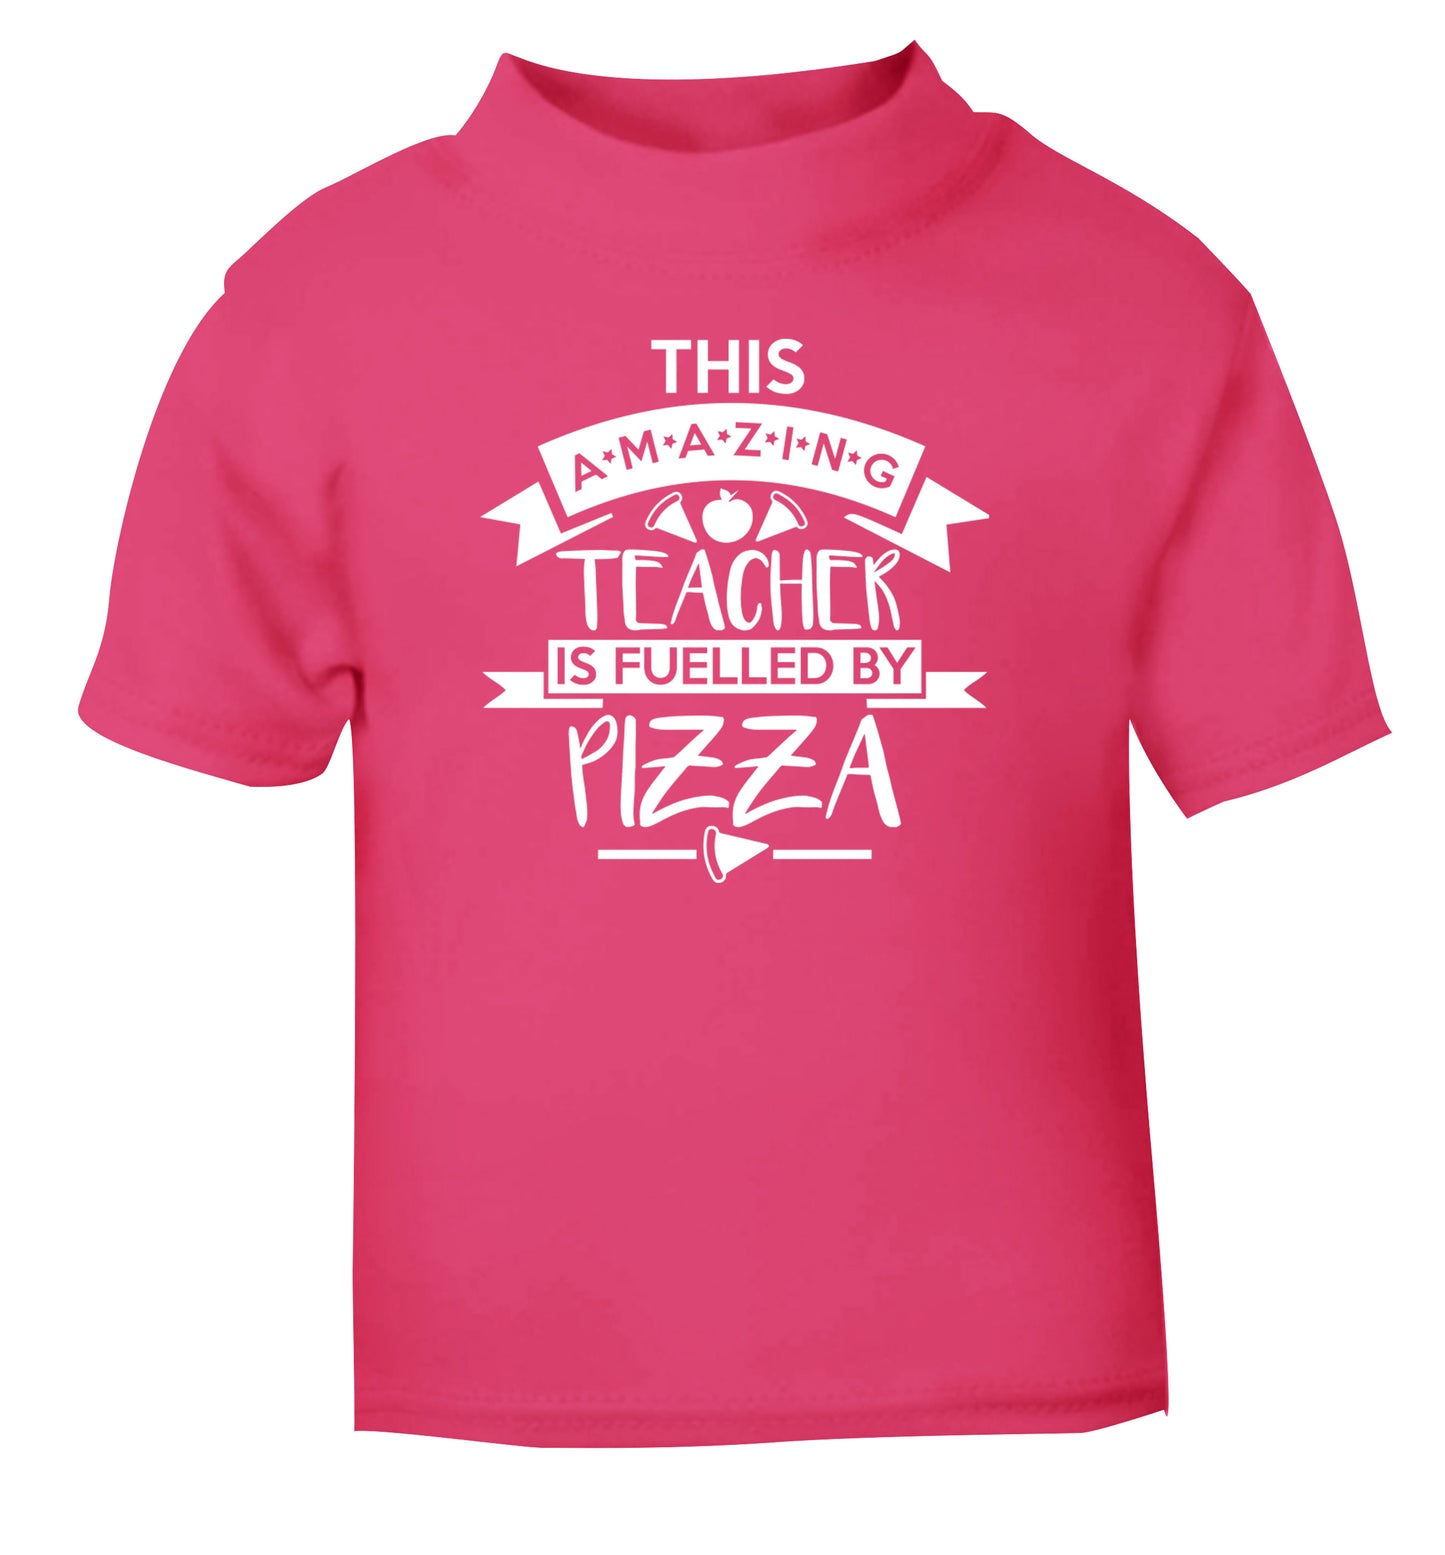 This amazing teacher is fuelled by pizza pink Baby Toddler Tshirt 2 Years